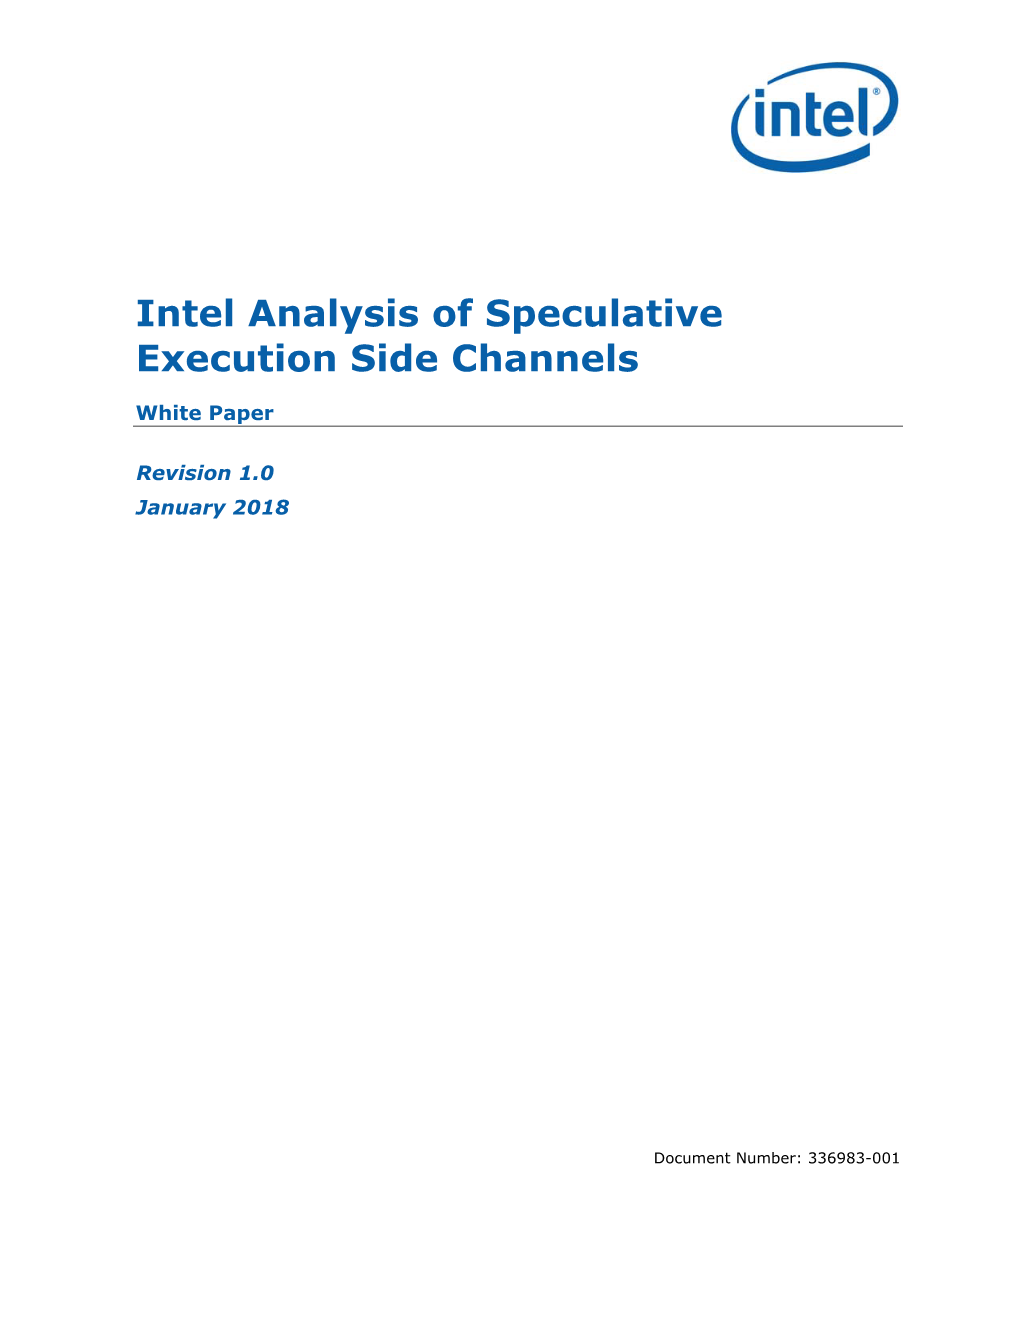 Intel Analysis of Speculative Execution Side Channels